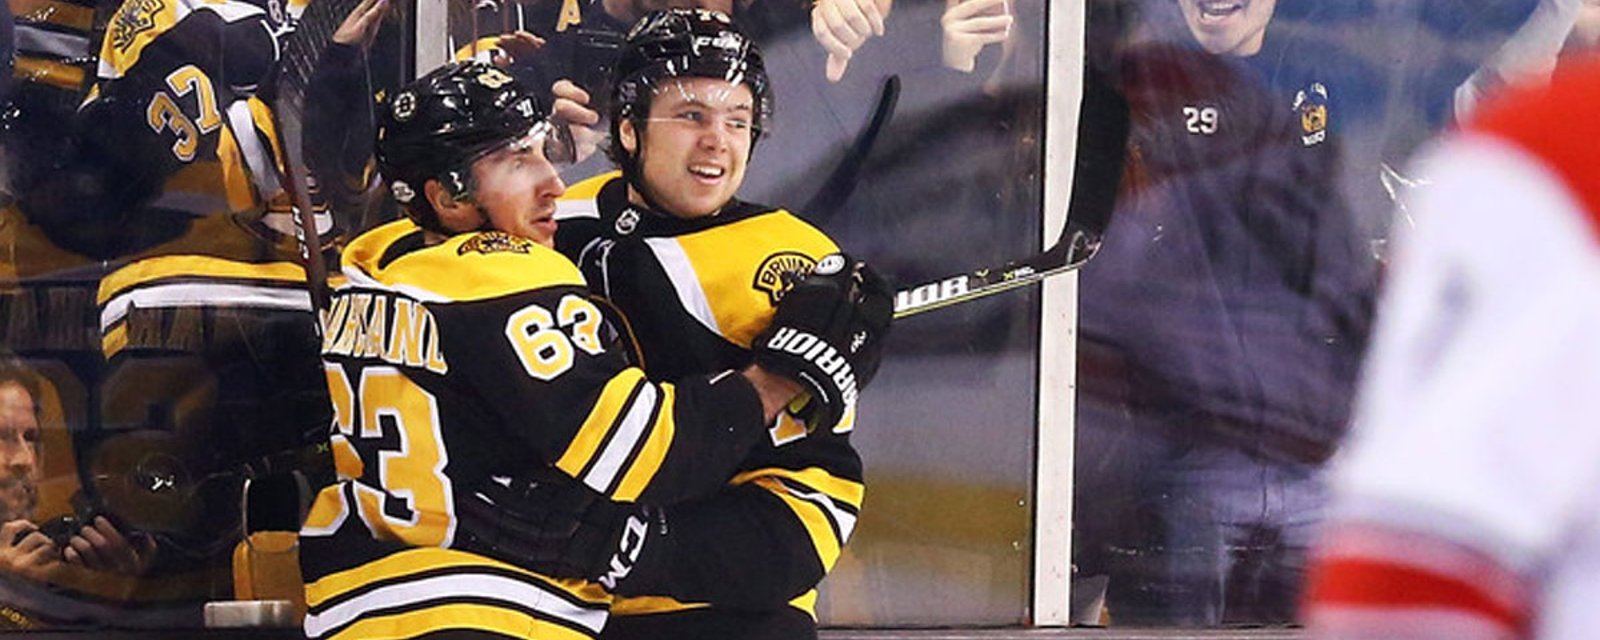 Twitter troll Marchand brutally chirps teammate McAvoy on social media! 